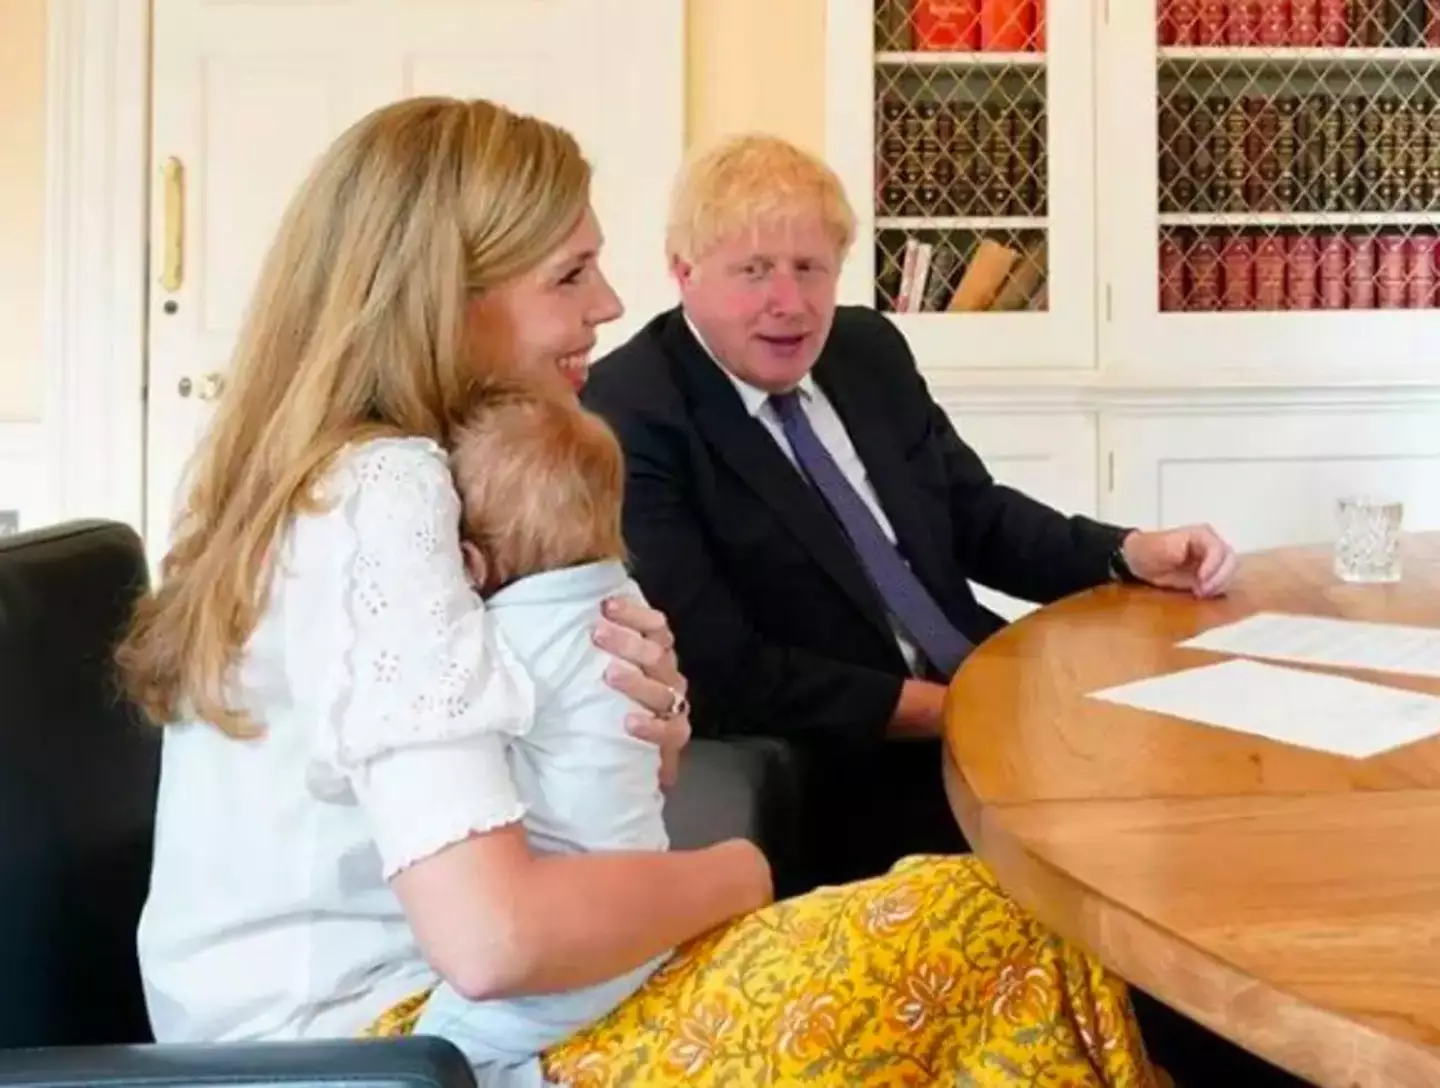 Boris and Carrie Johnson are both set to receive fines. (